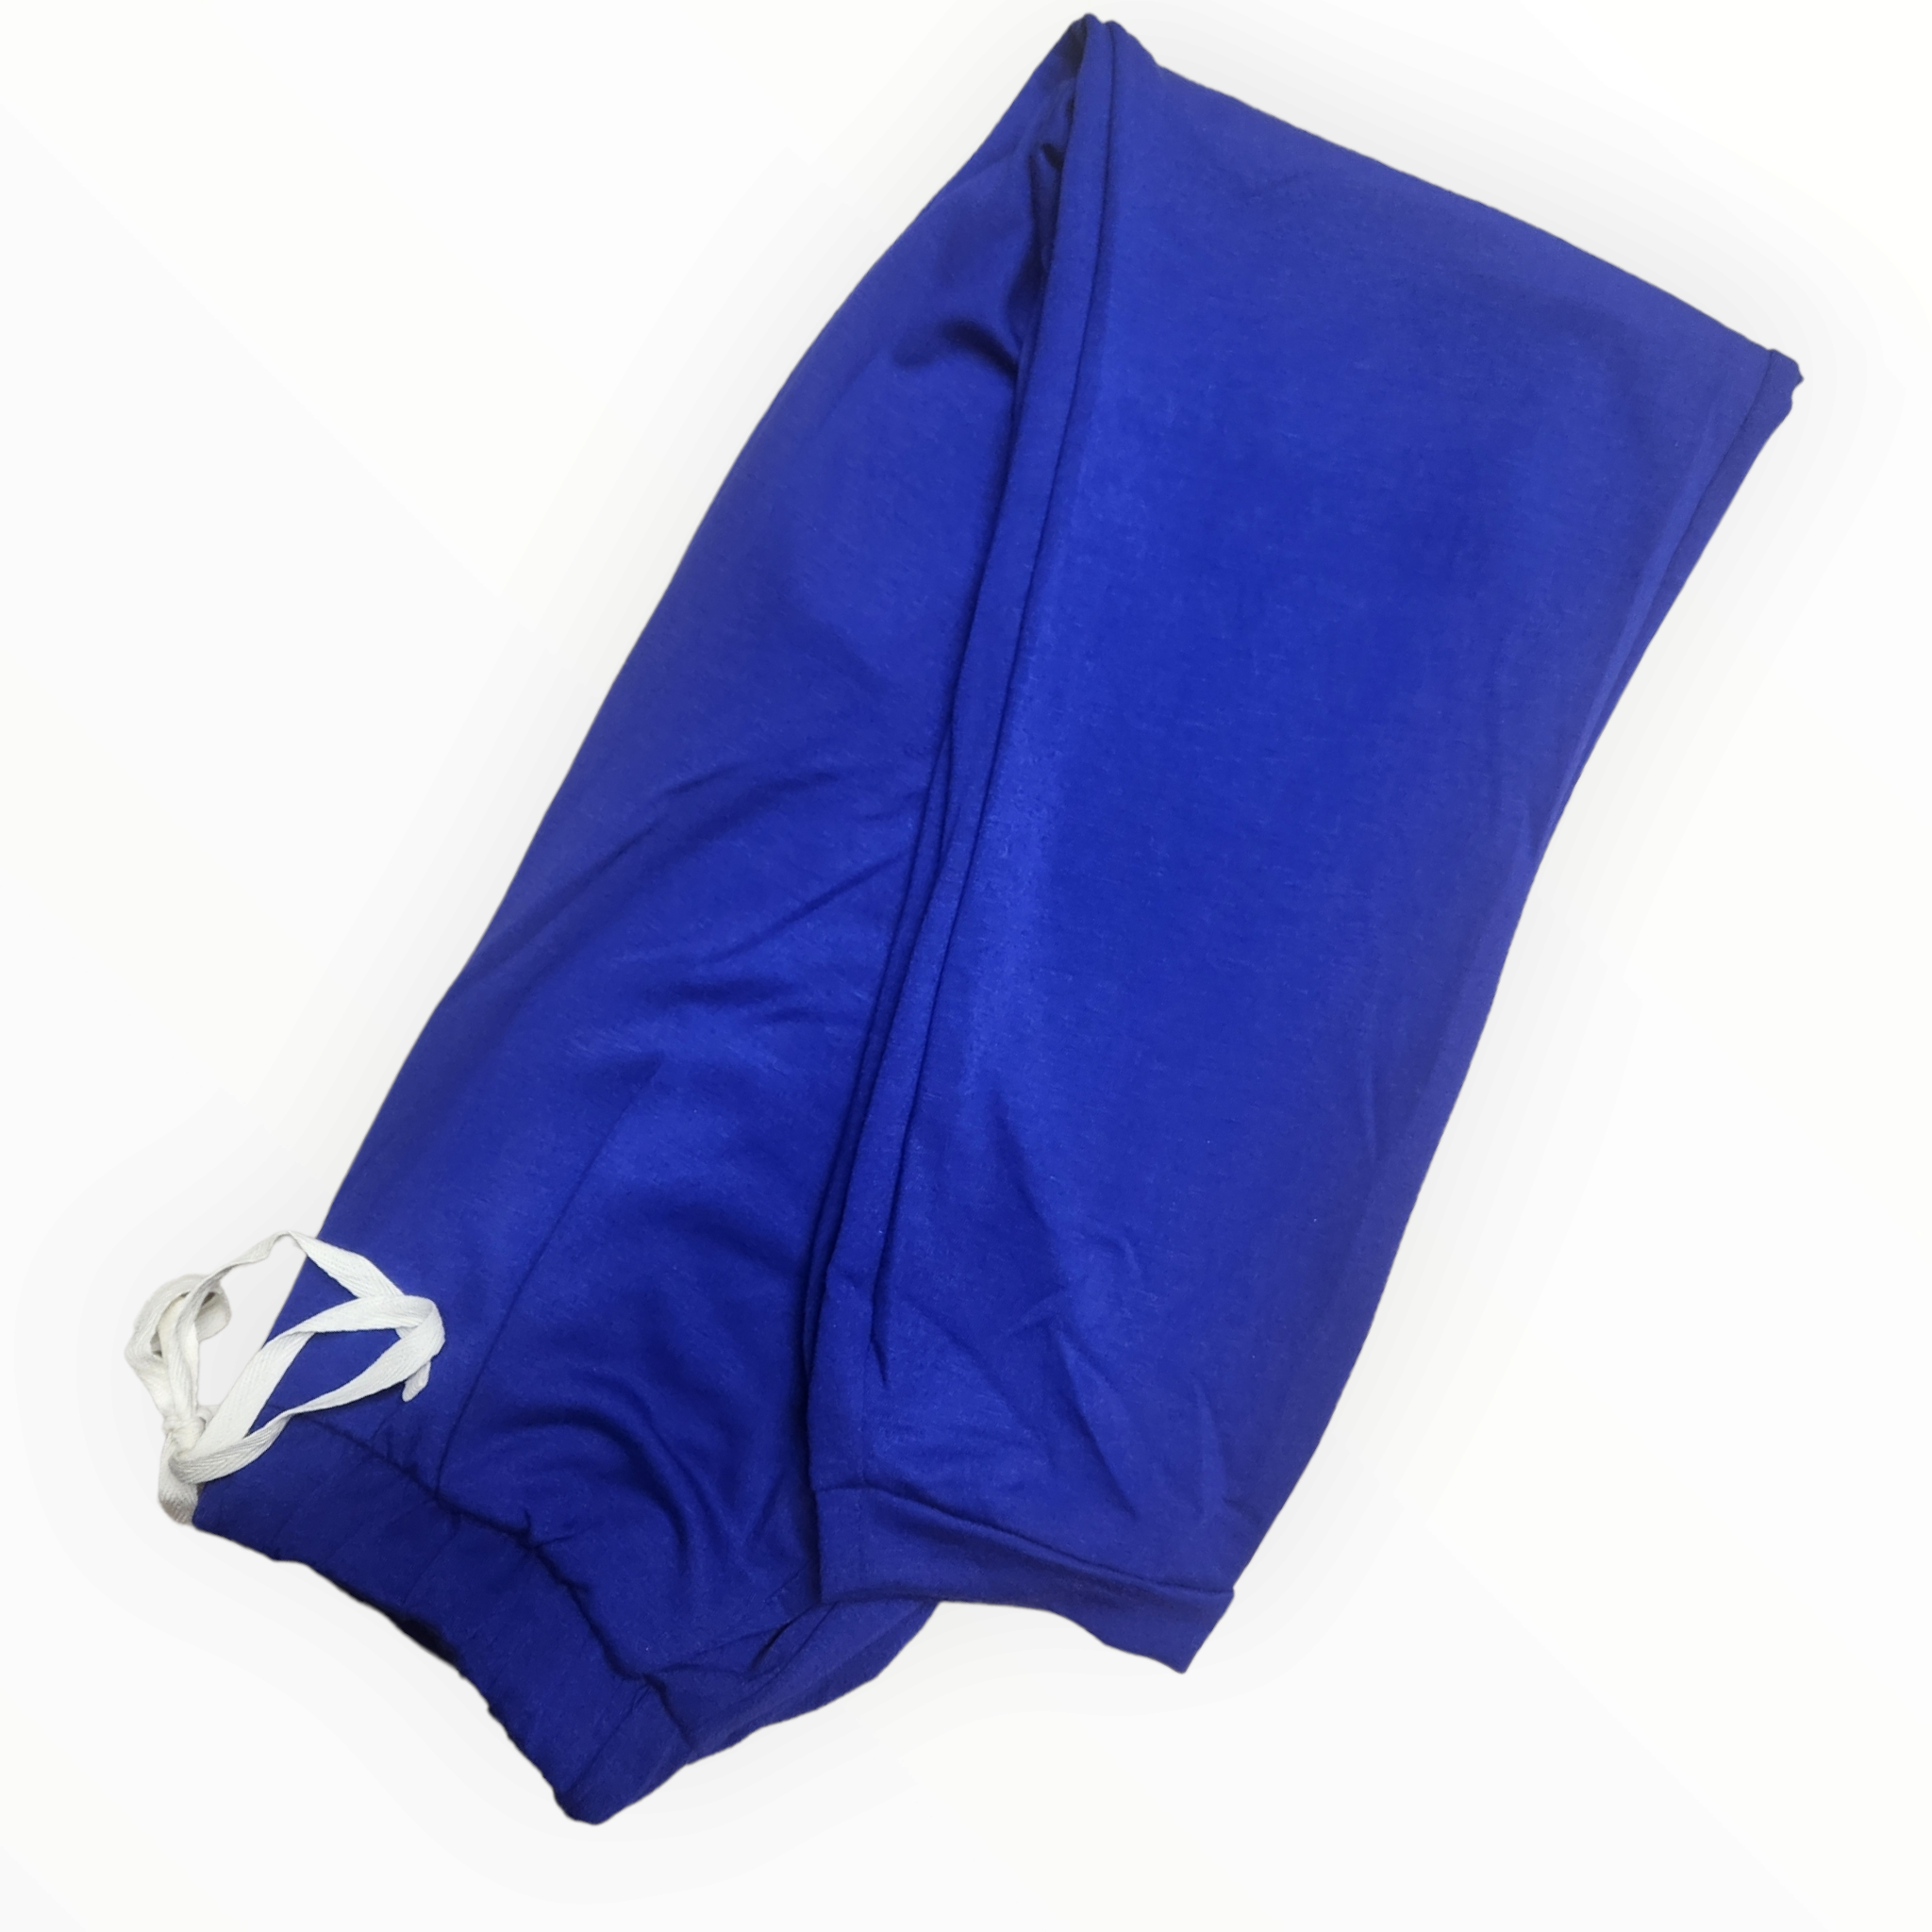 Soft French Terry Jogger Pants - Regular/Plus - Bright Royal Blue-Joggers-LouisGeorge Boutique-LouisGeorge Boutique, Women’s Fashion Boutique Located in Trussville, Alabama